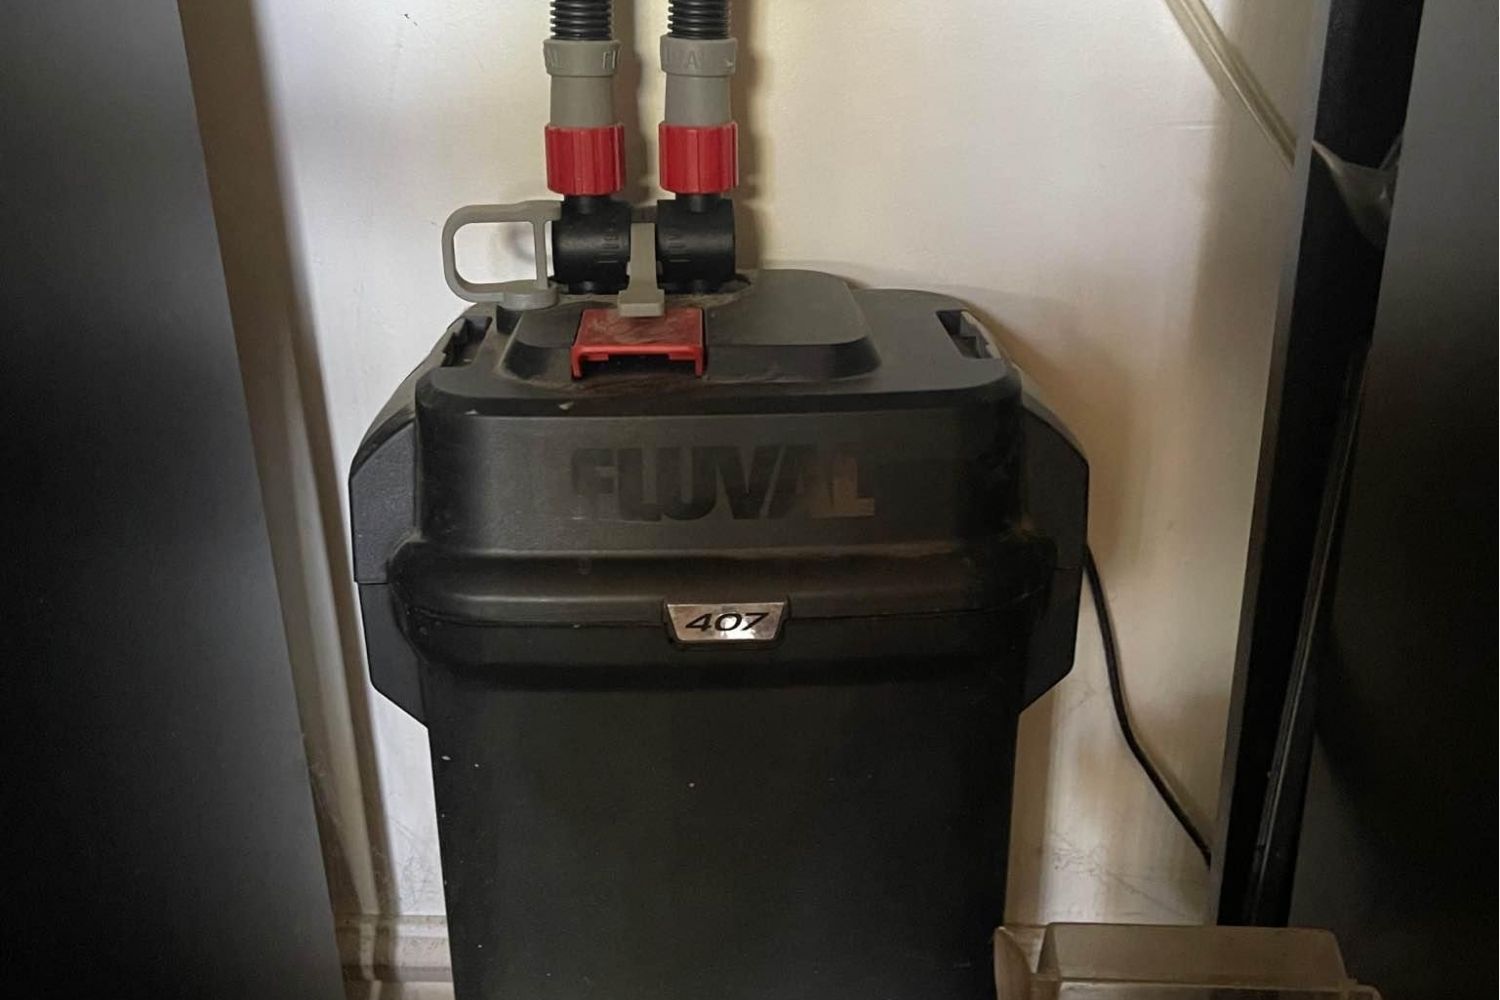 Fluval 407 Canister Filter Review Features